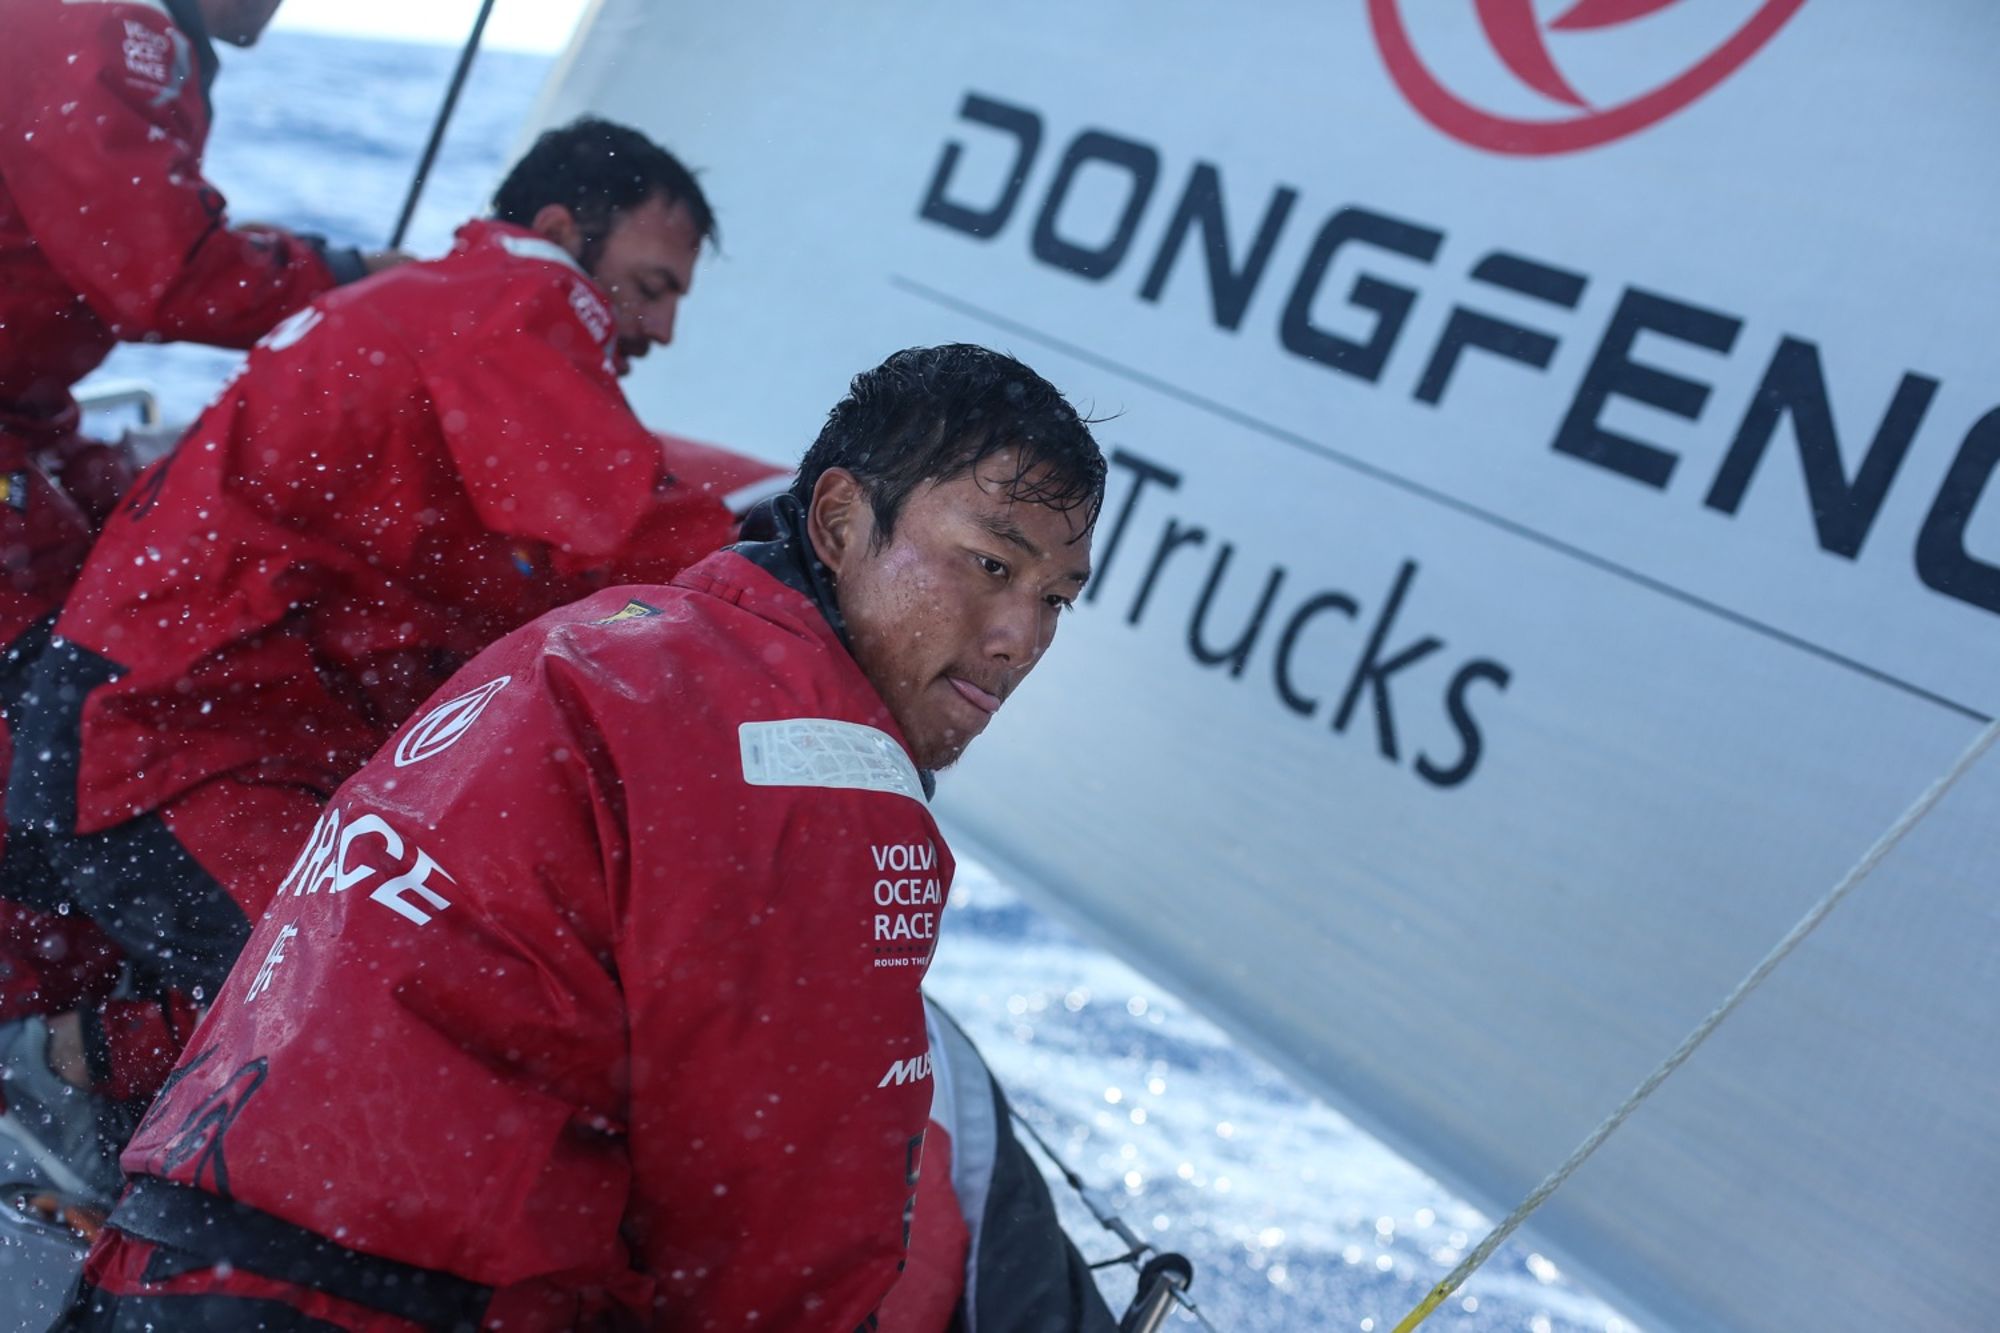 Chinese sailor Chen Jin Hao (Horace) onboard Dongfeng Race Team. Photo © Yann Riou / Dongfeng Race Team.